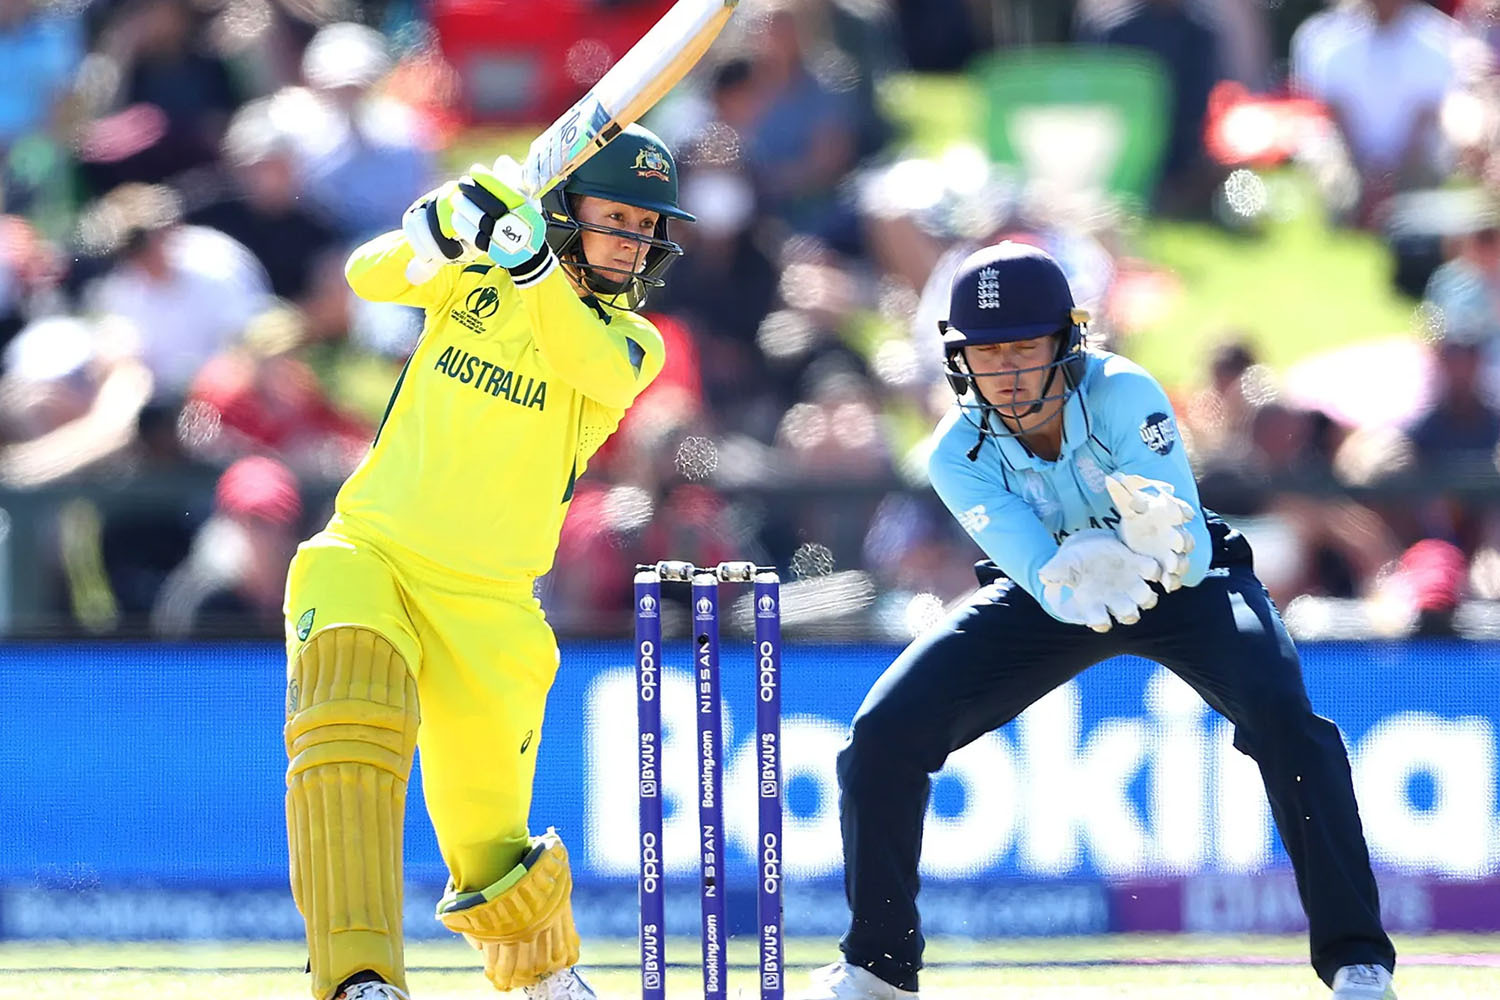 Women’s Cricket World Cup Generates Record Views